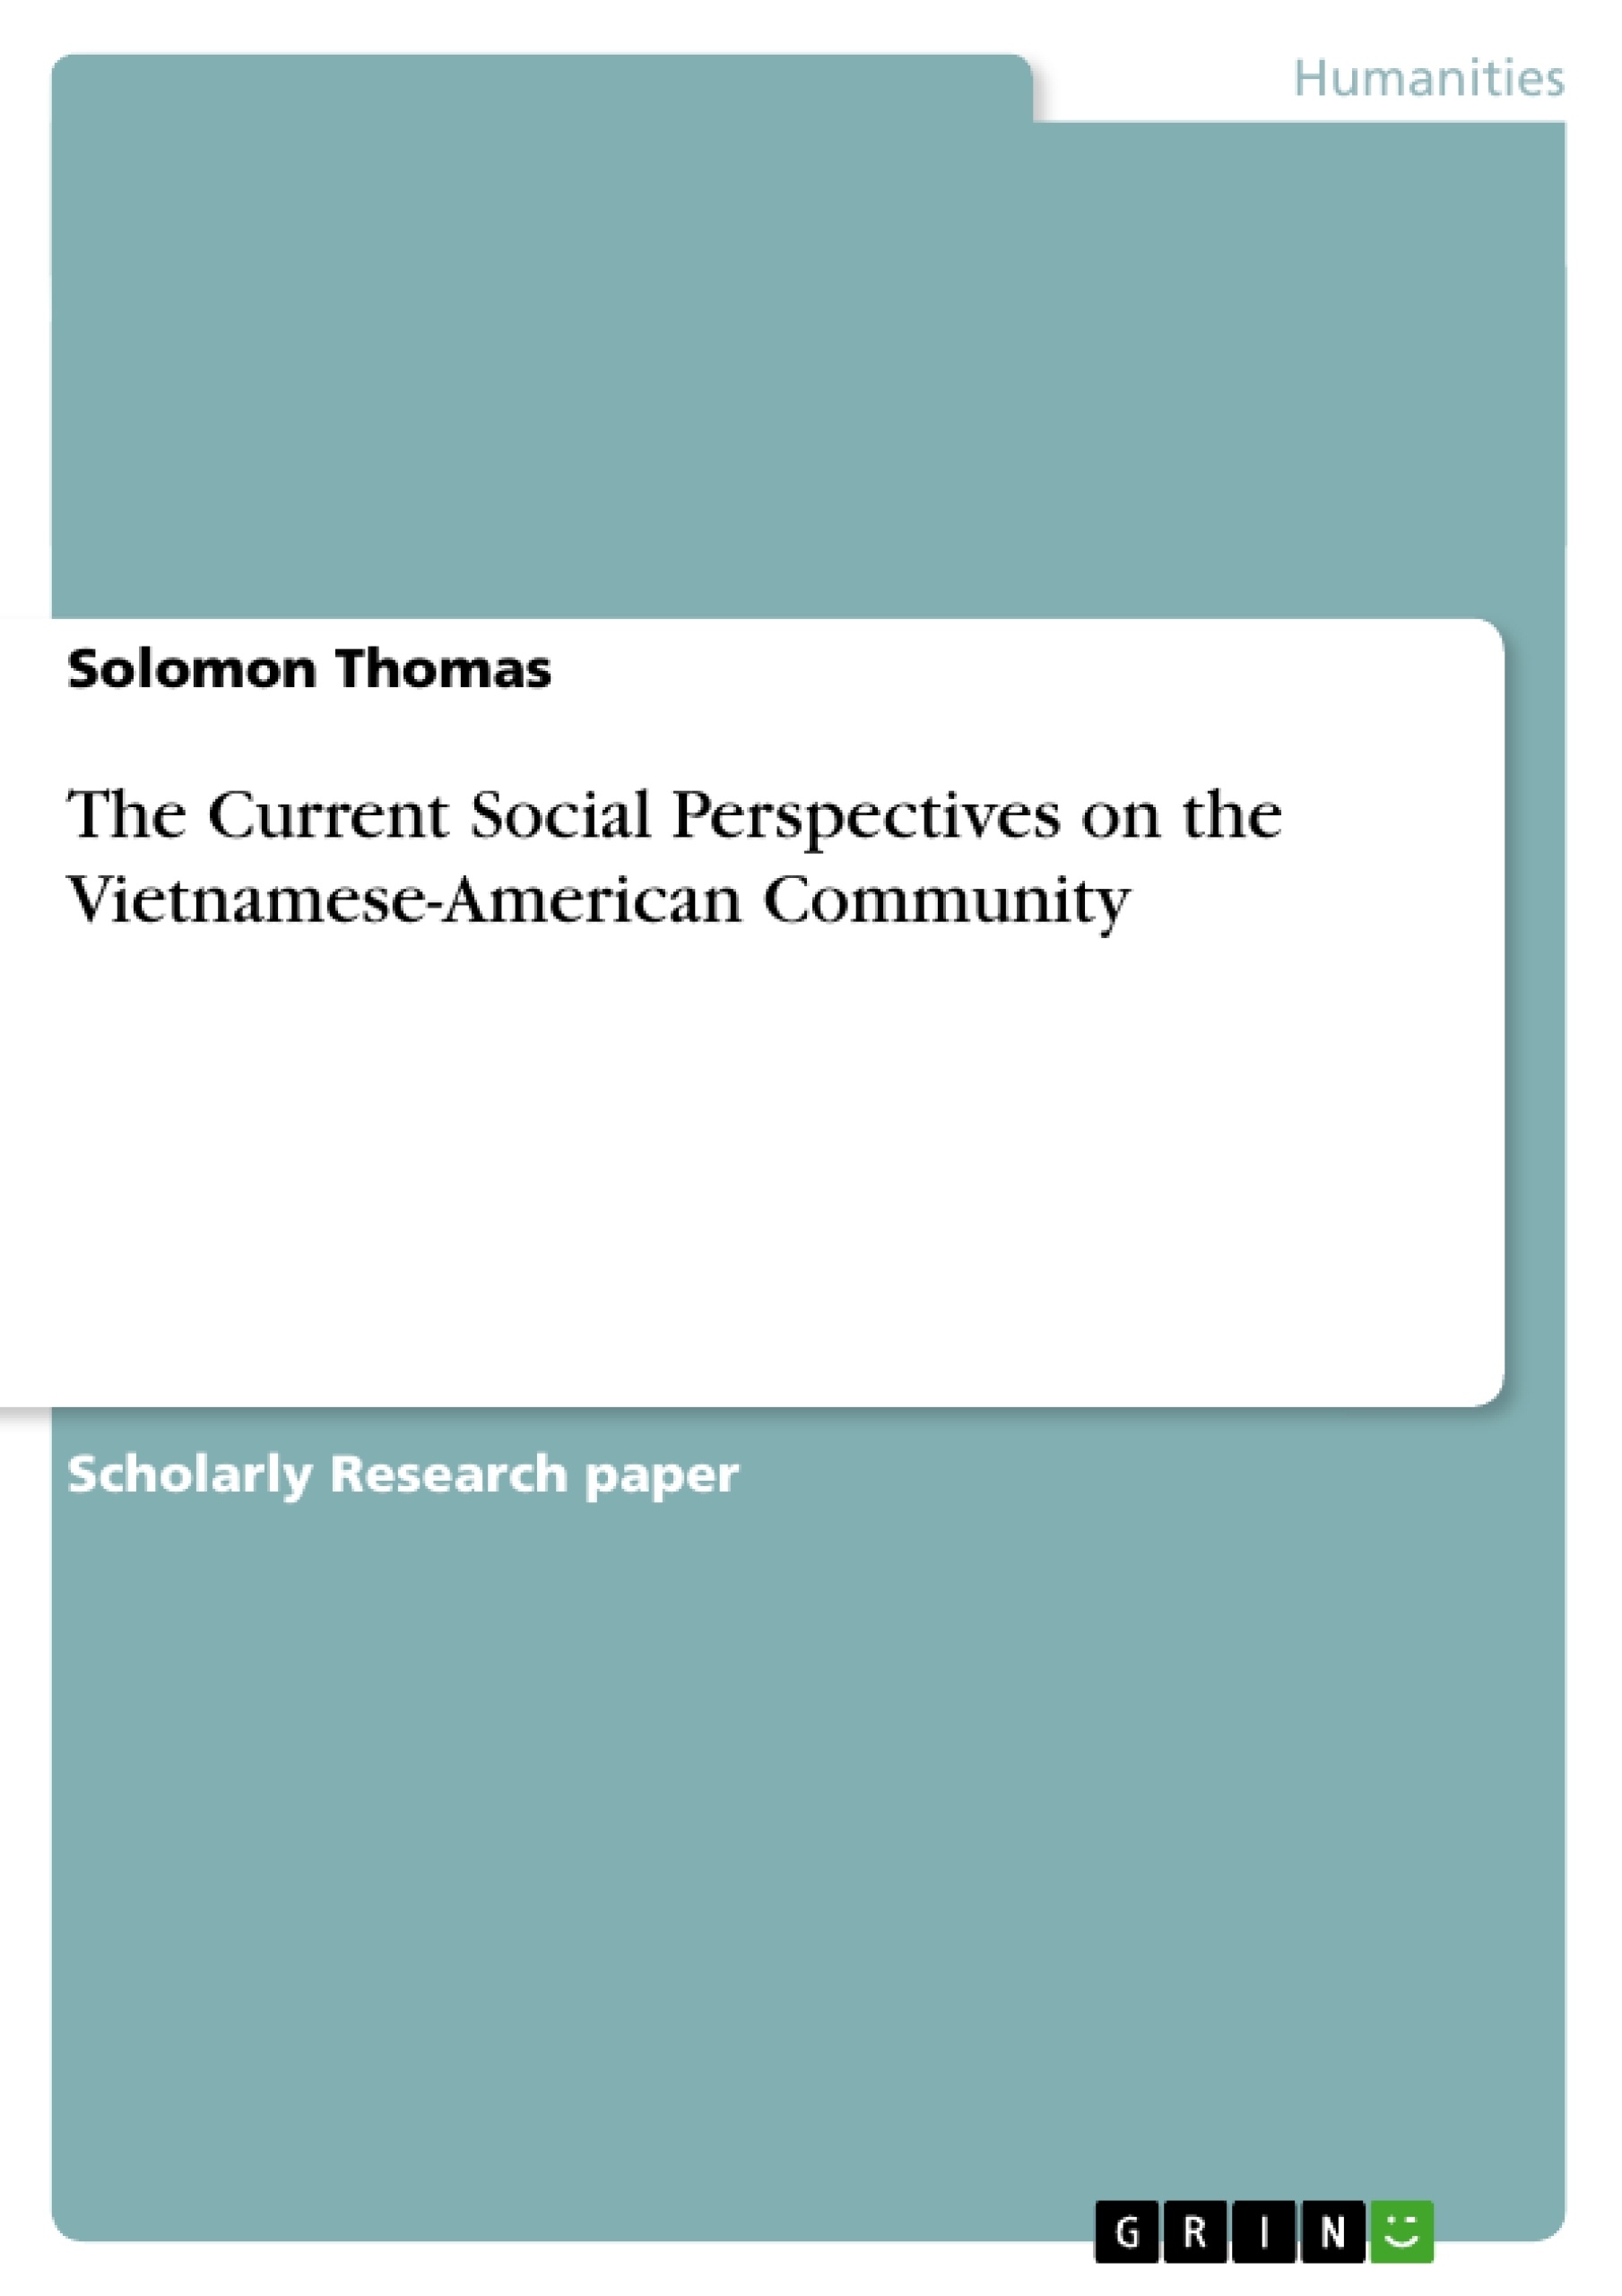 Title: The Current Social Perspectives on the Vietnamese-American Community